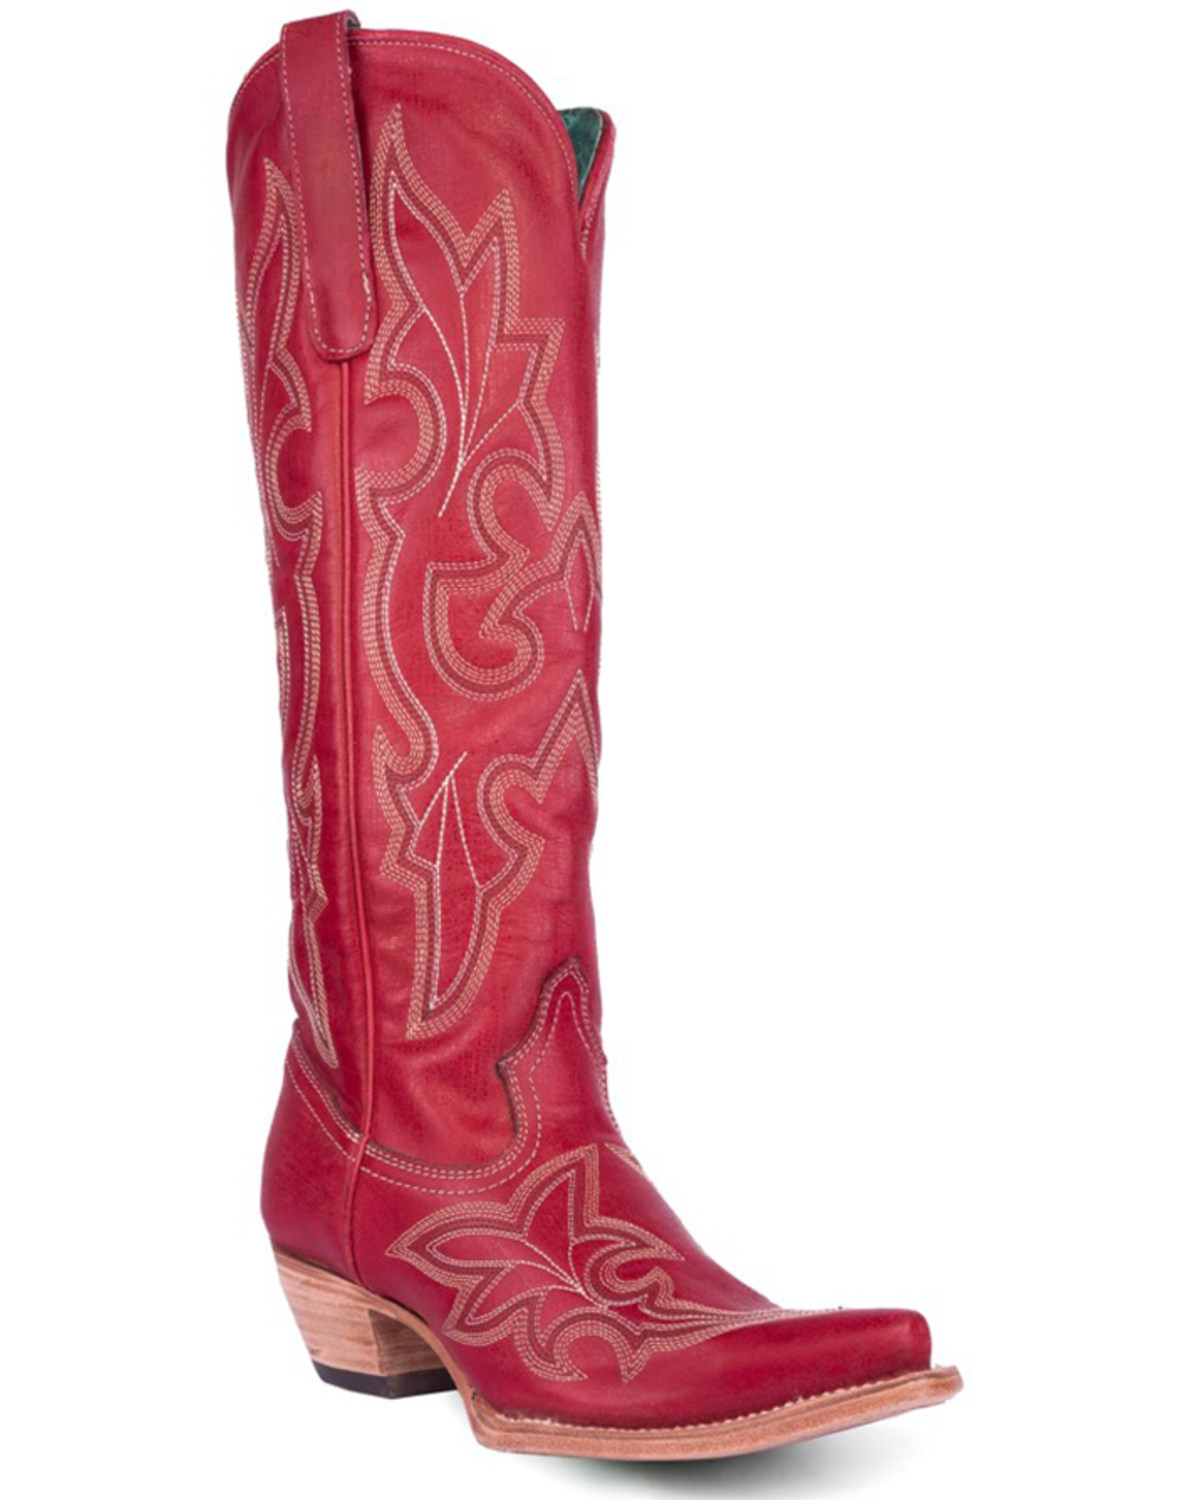 Corral Women's Tall Western Boots - Snip Toe